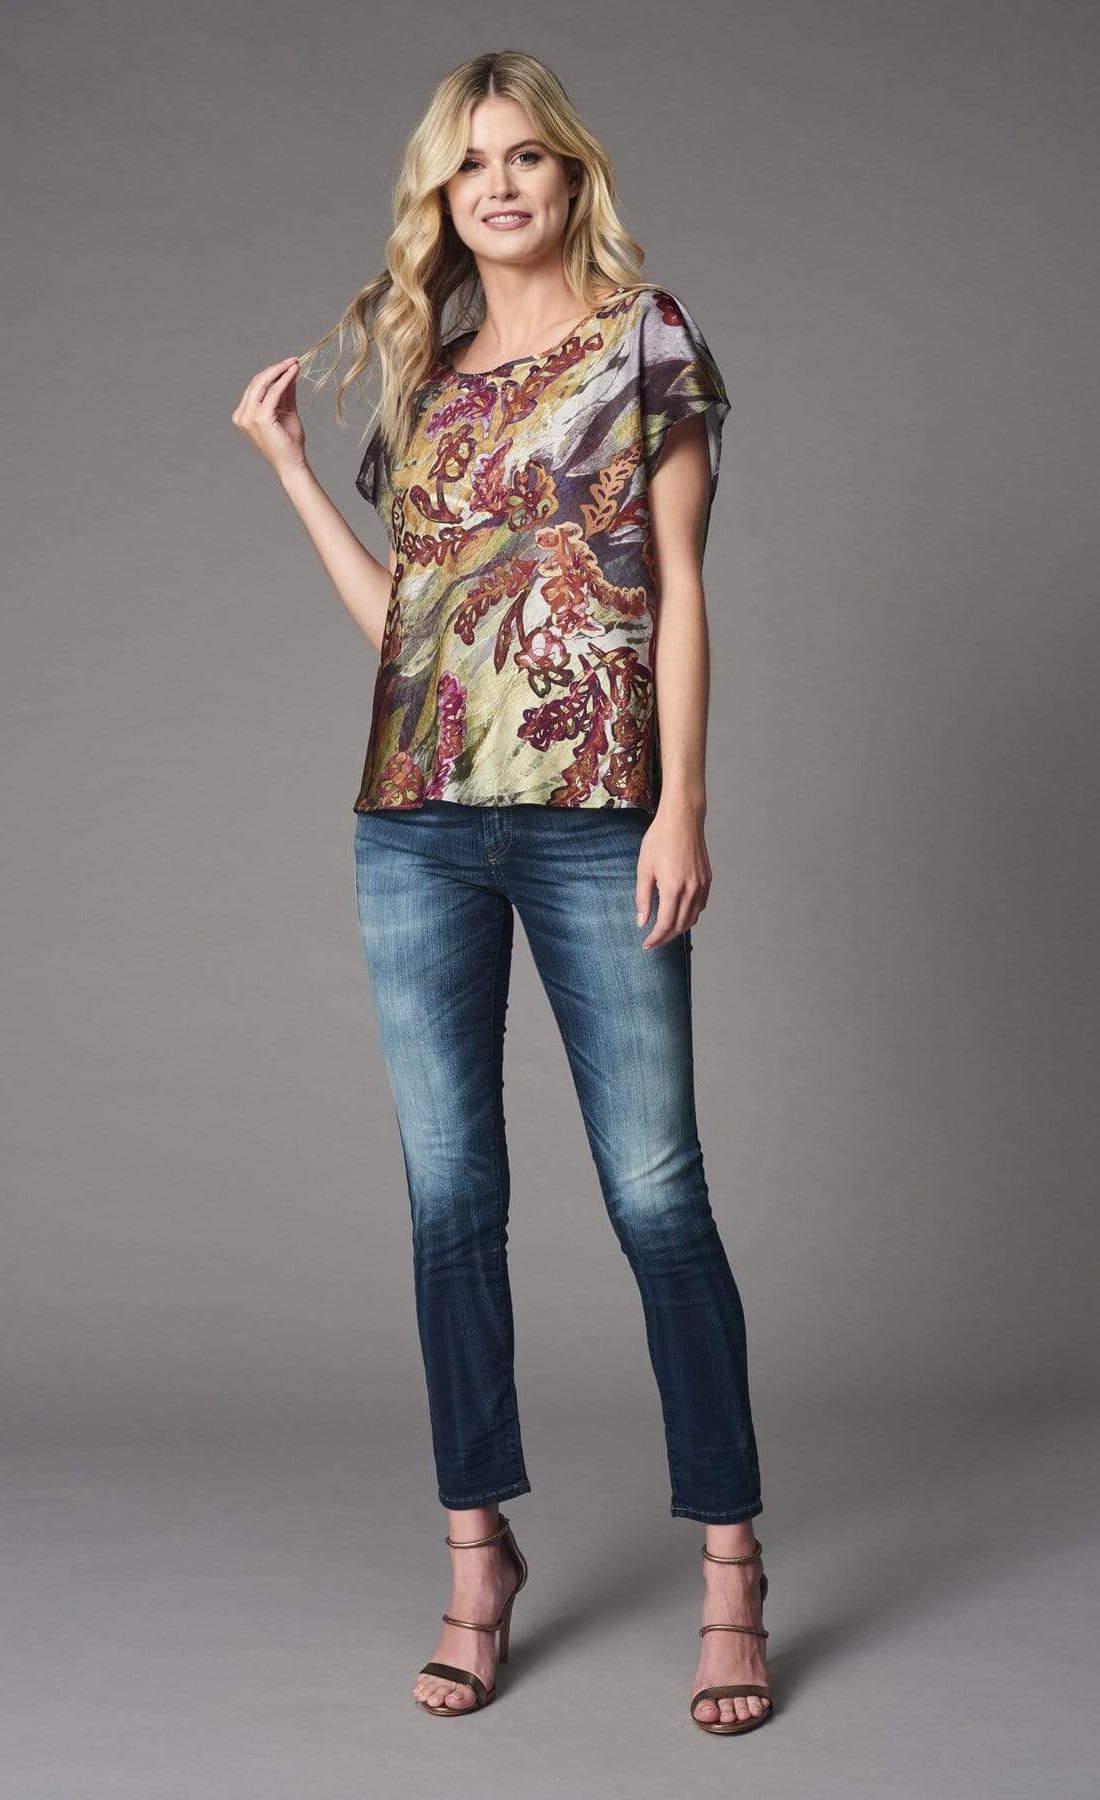 Front full body view of a woman wearing the lola & sophie fairytale top. This top has short sleeves and a bias cut. The print on the top has warm autumn colors mixed in with a wine colored floral print.